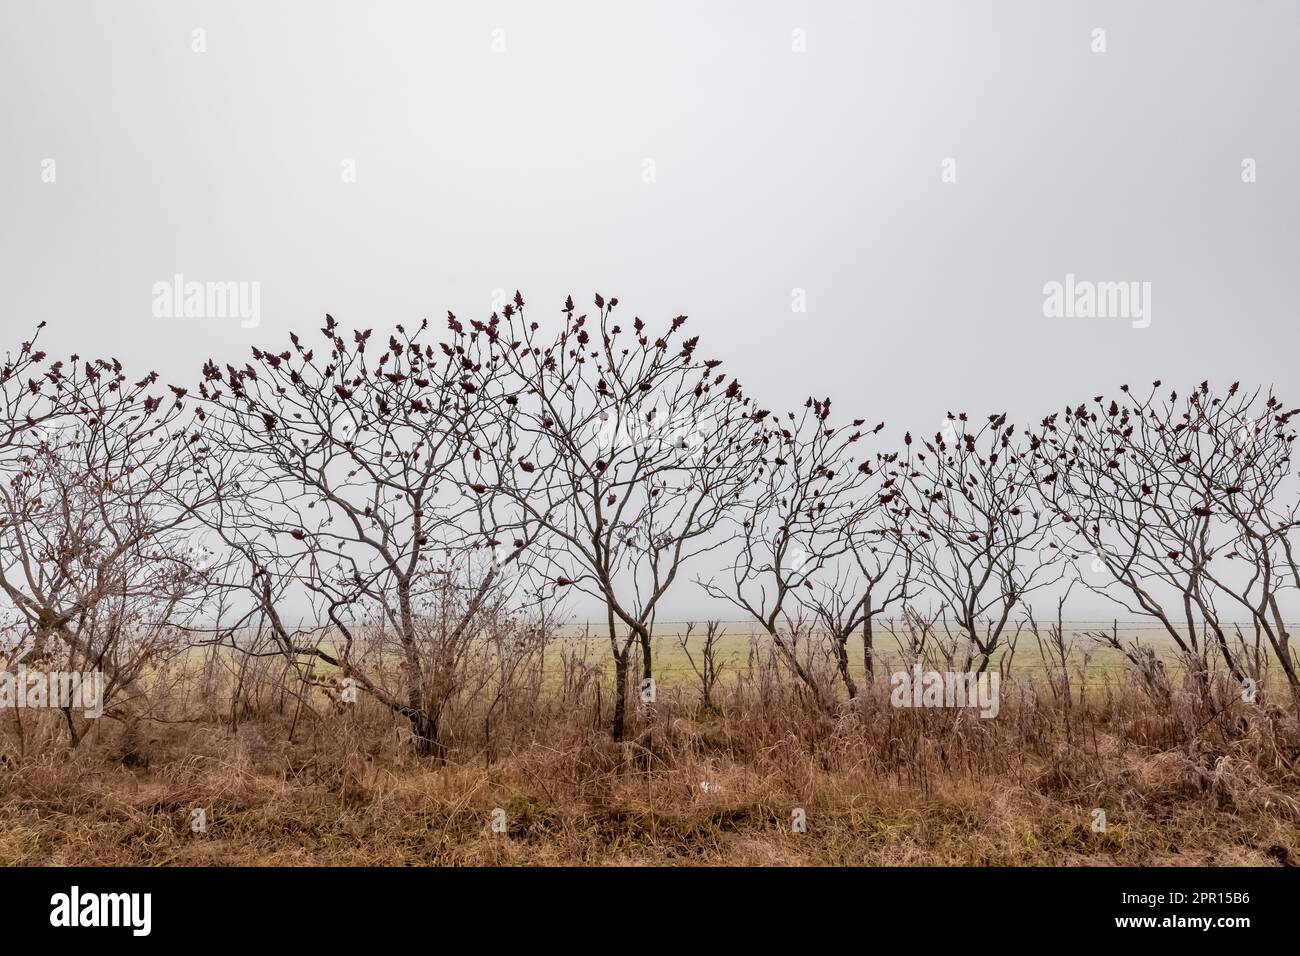 Sumac, Rhus sp., along a fencerow on a foggy day in Central Michigan, USA Stock Photo